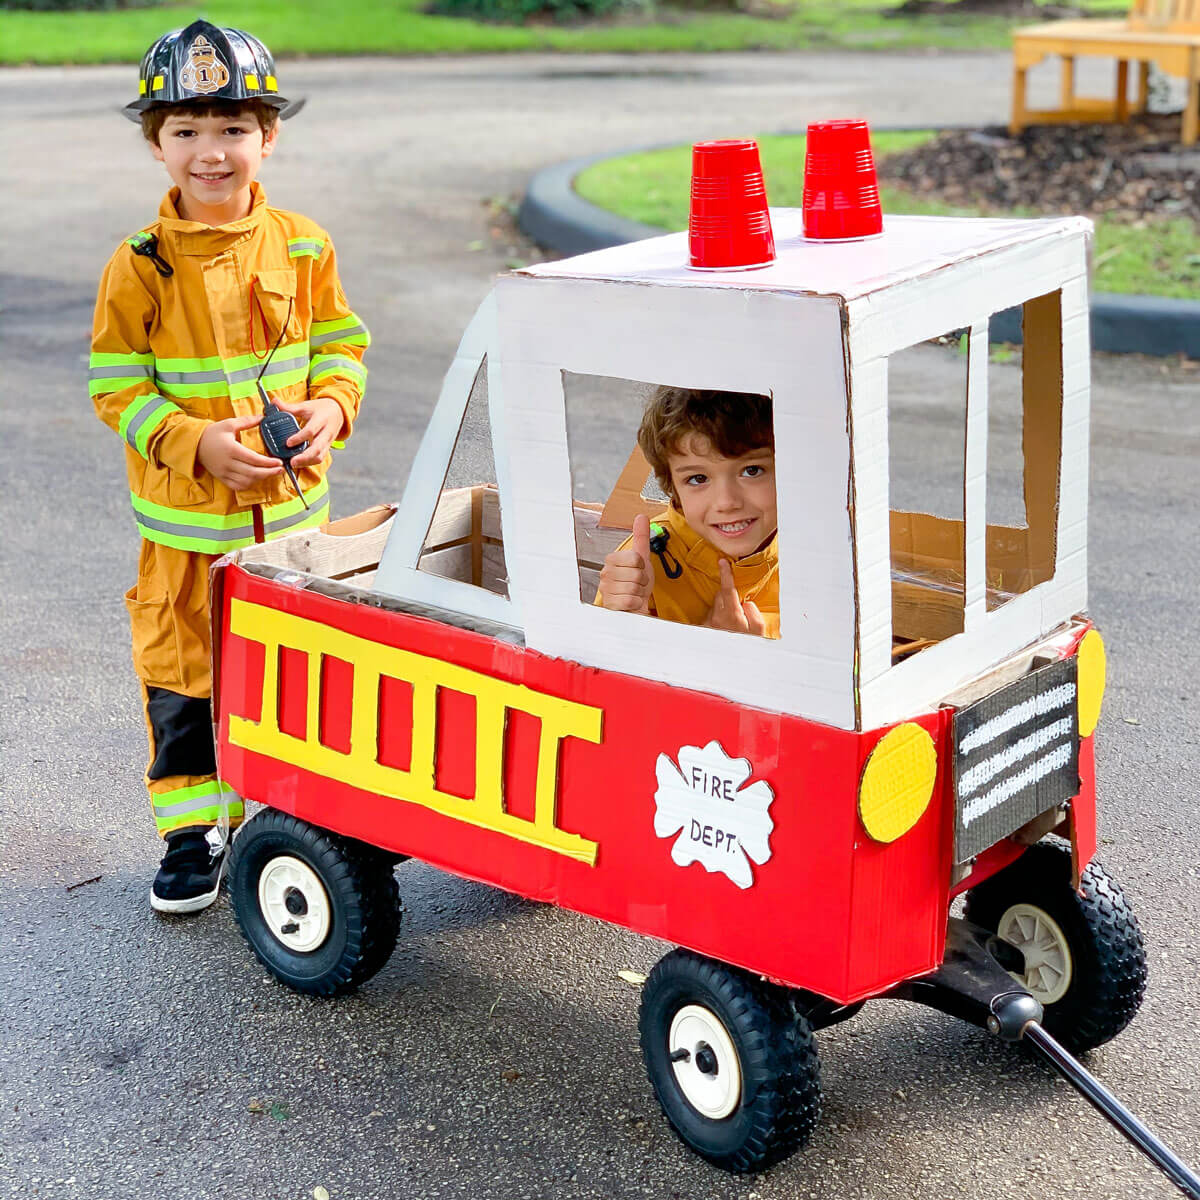 DIY Firefighter Costume – How to Make a Fire Truck